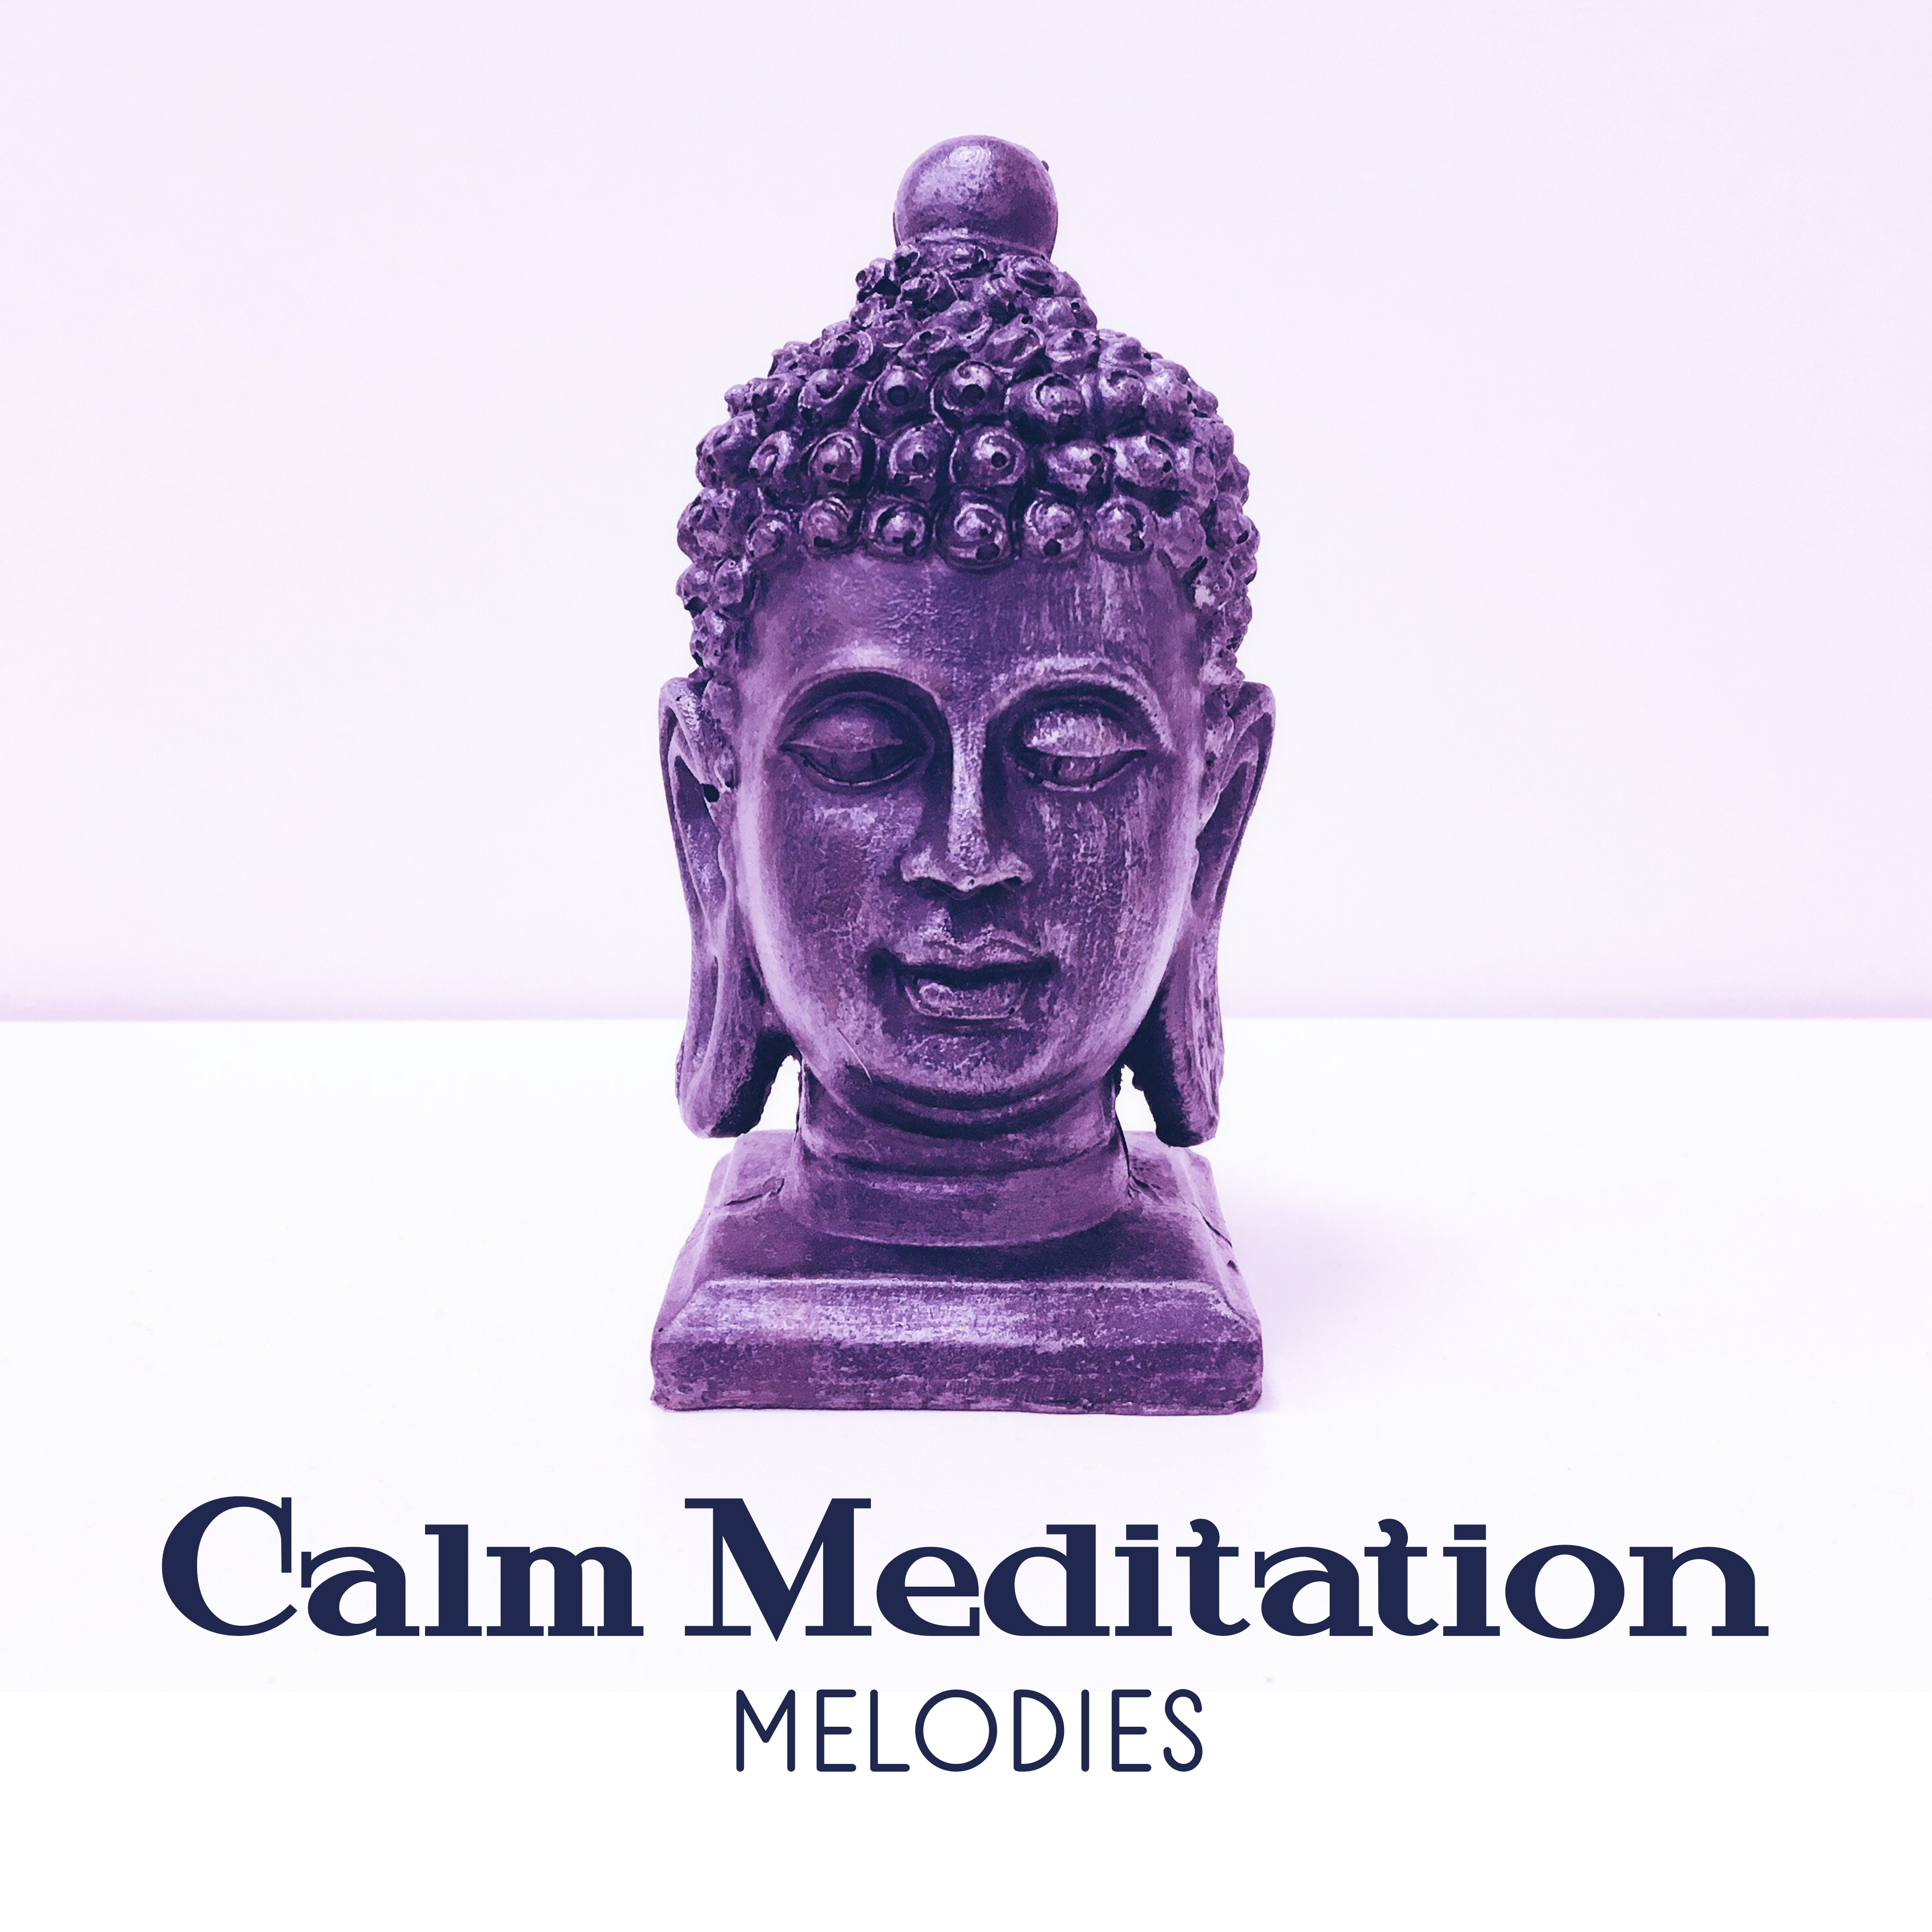 Calm Meditation Melodies  Soft Relaxing New Age Music, Zen Garden, Soothing Sounds to Meditate